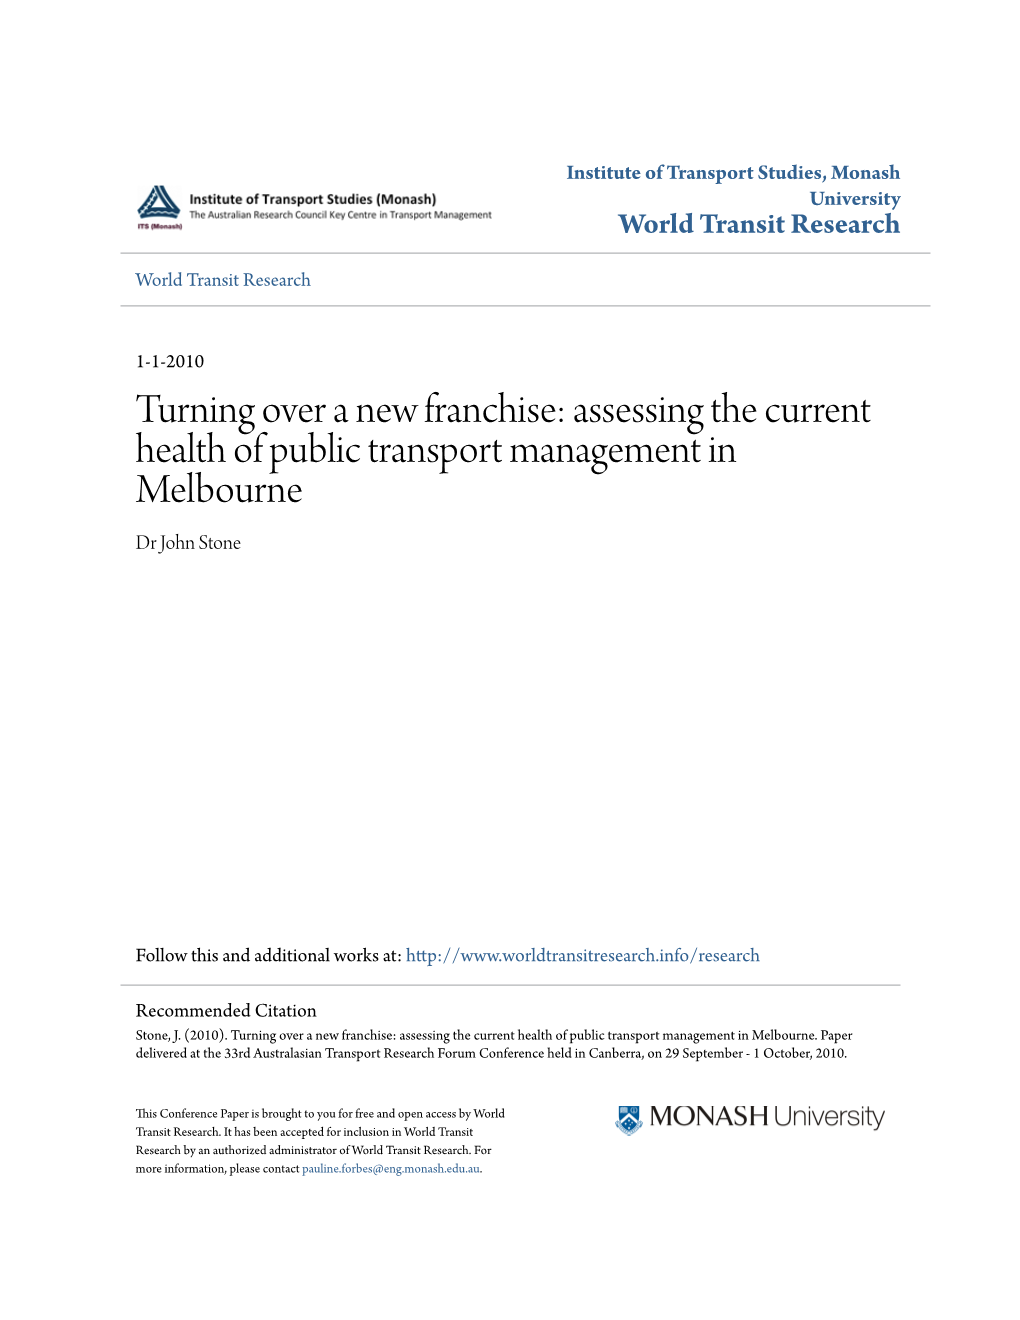 Turning Over a New Franchise: Assessing the Current Health of Public Transport Management in Melbourne Dr John Stone